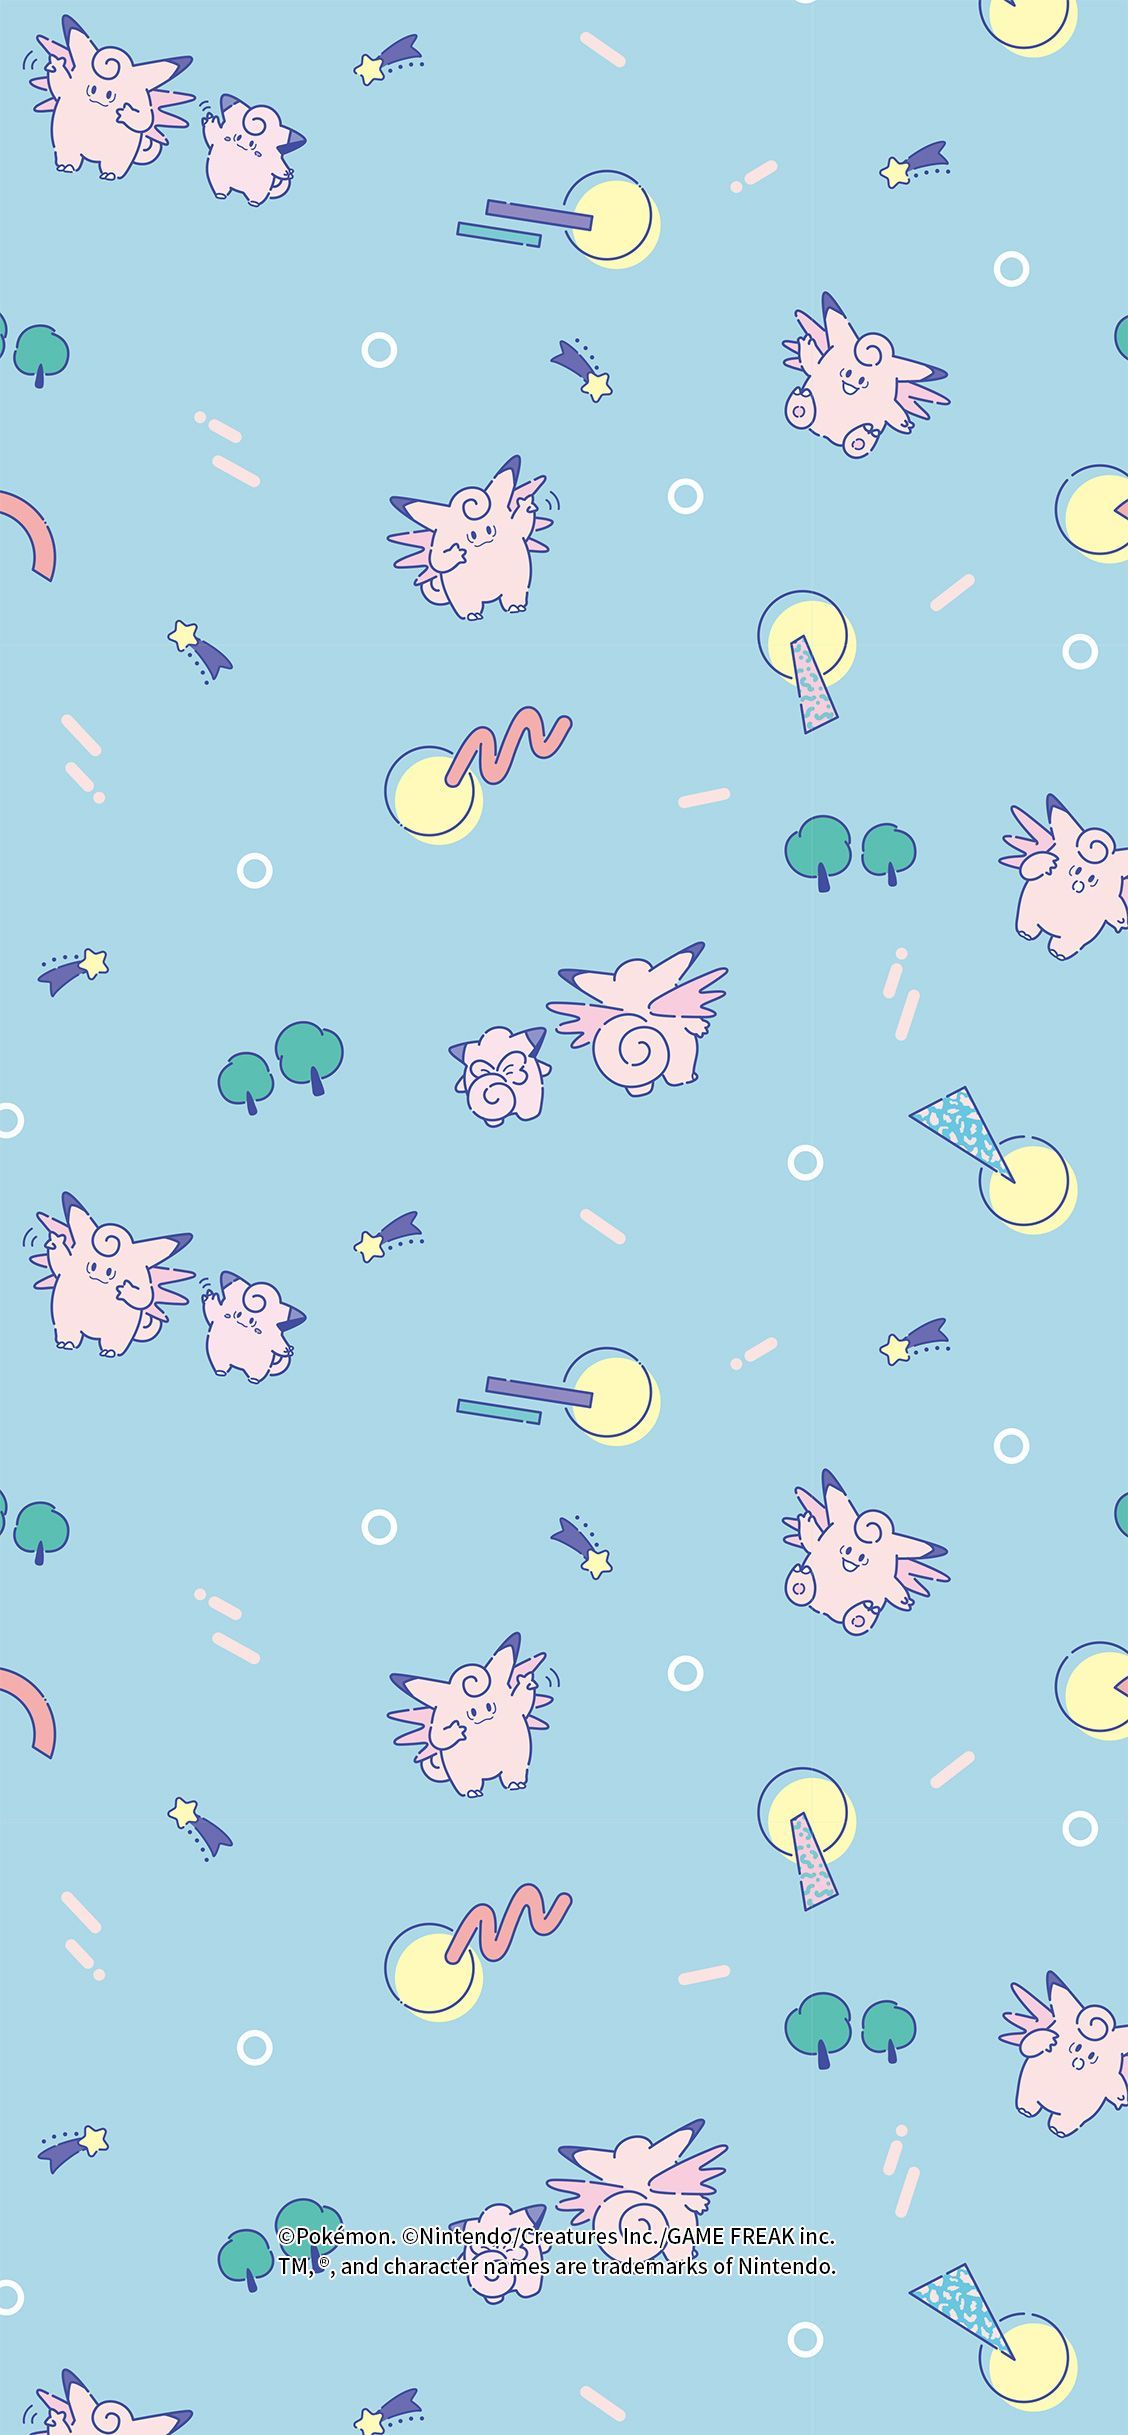 A blue background with pink and white animals - Nintendo